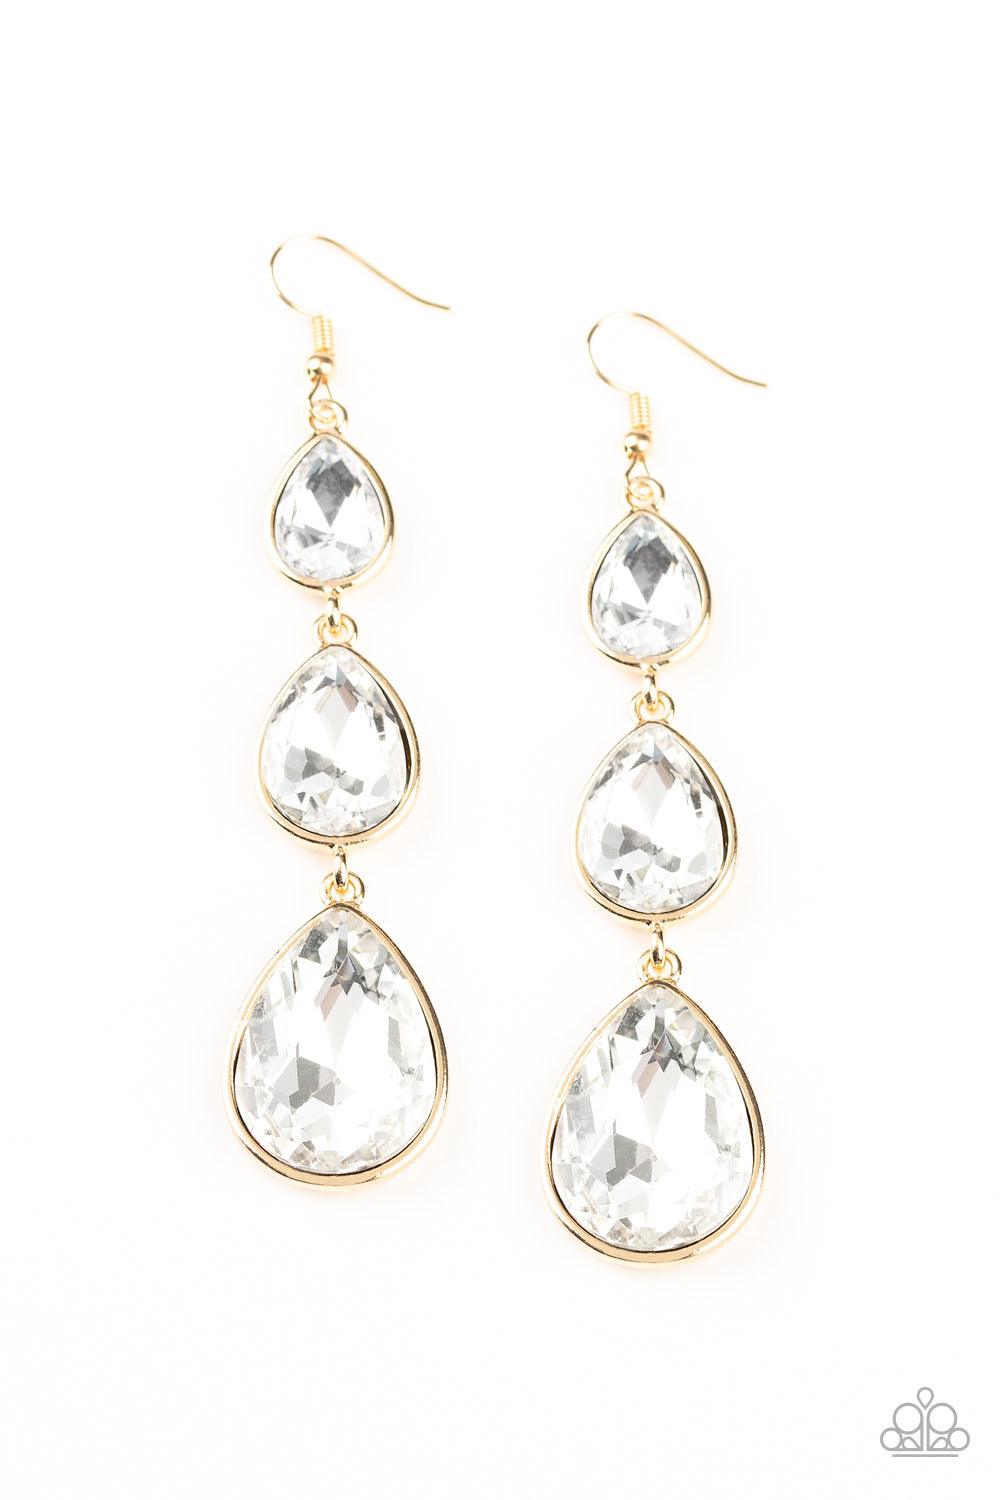 Paparazzi Accessories Metro Momentum - Gold Featuring sleek gold frames, exaggerated white teardrop rhinestones gradually increase in size as they drip from the ear. Earring attaches to a standard fishhook fitting. Sold as one pair of earrings. Jewelry